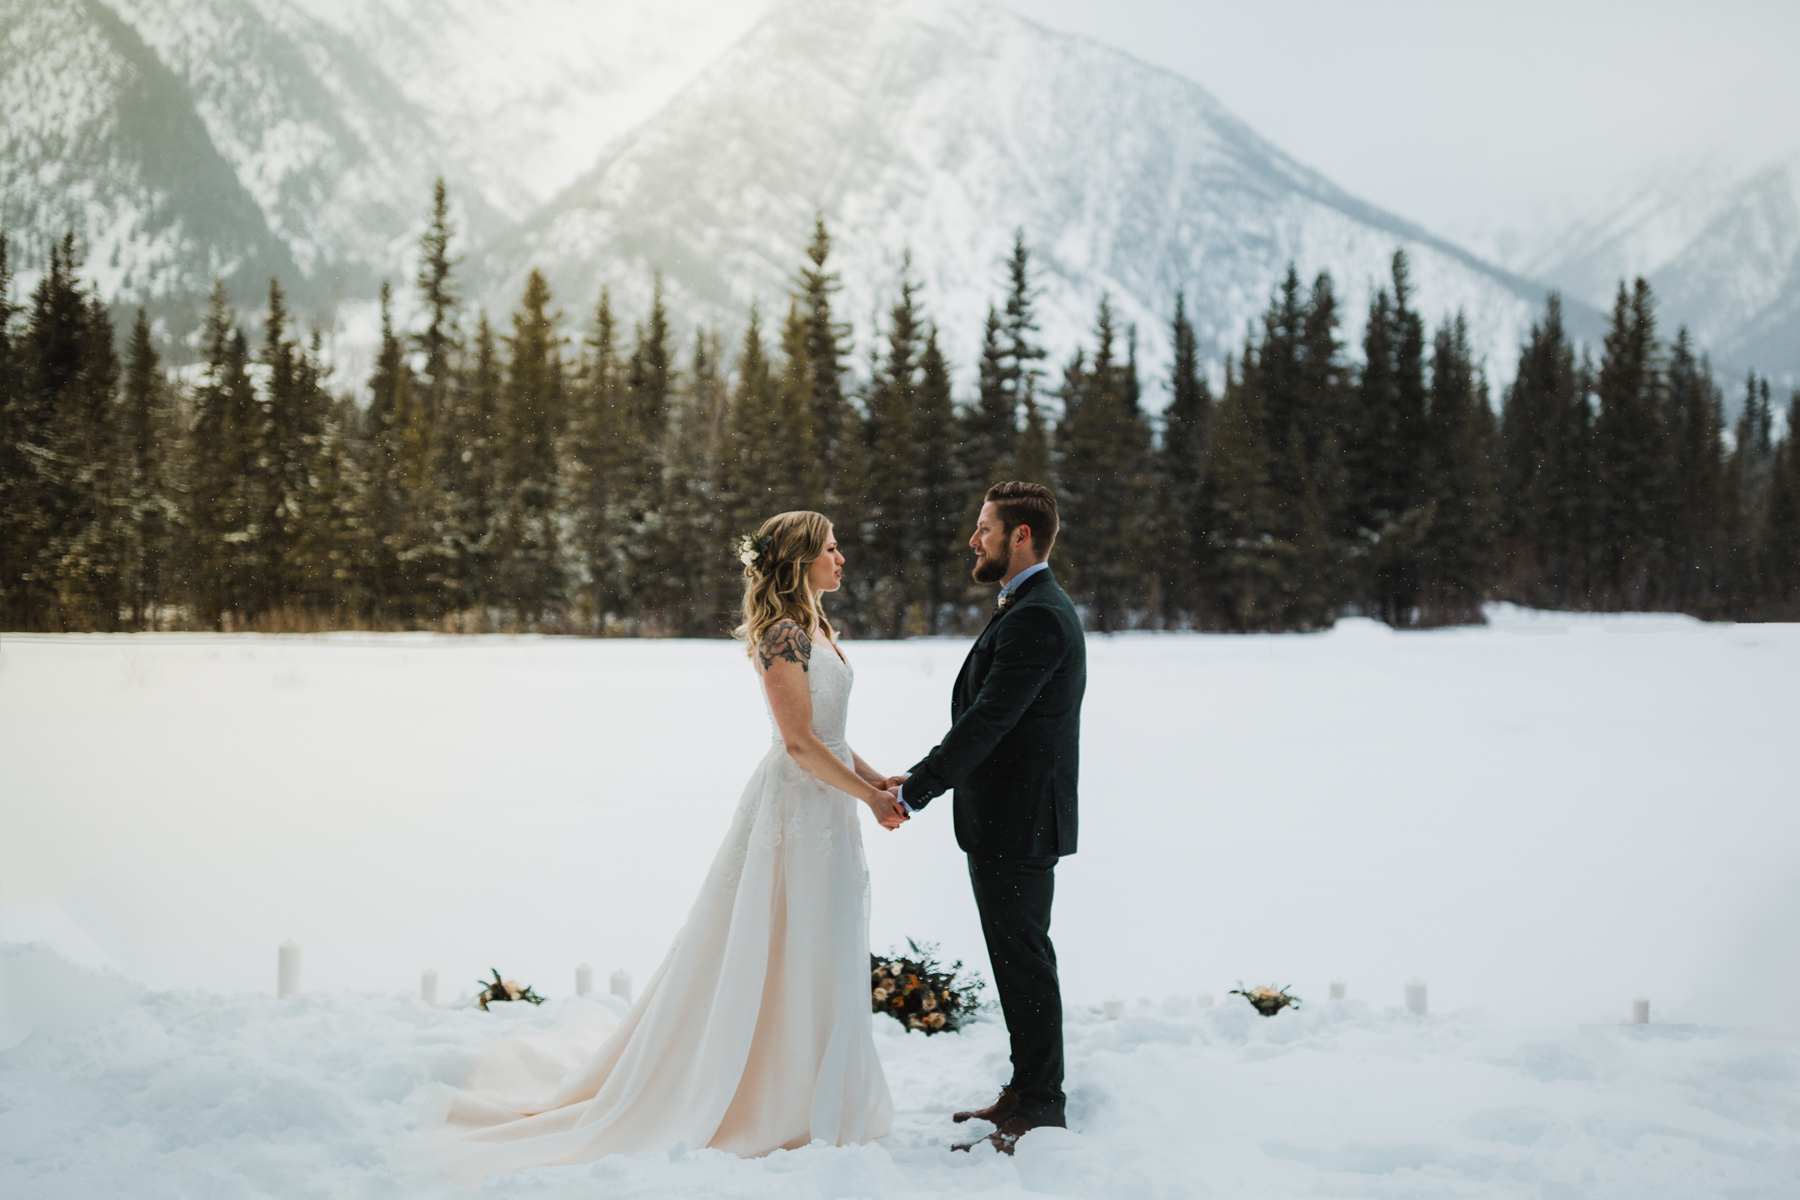 An Adventurous Canmore Elopement Photographer Shoot in Alberta Rocky Mountains